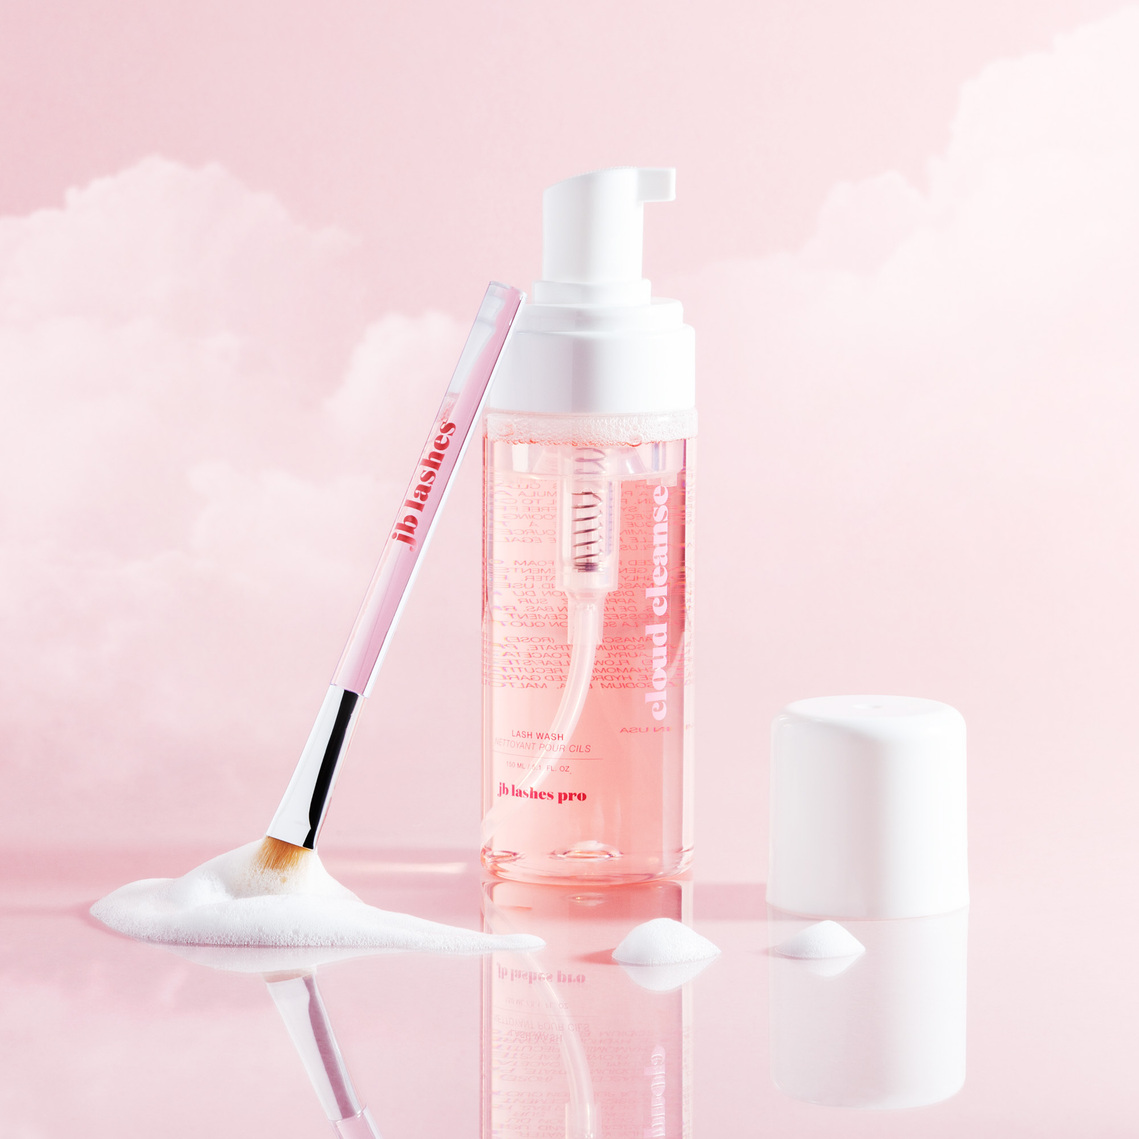 JB Lashes Pro Lash Wash Pump Bottle on Pink background with Clouds, cleansing brush sitting in foam suds with cap off product photography prop styling by photographer stylist Becca M los angeles